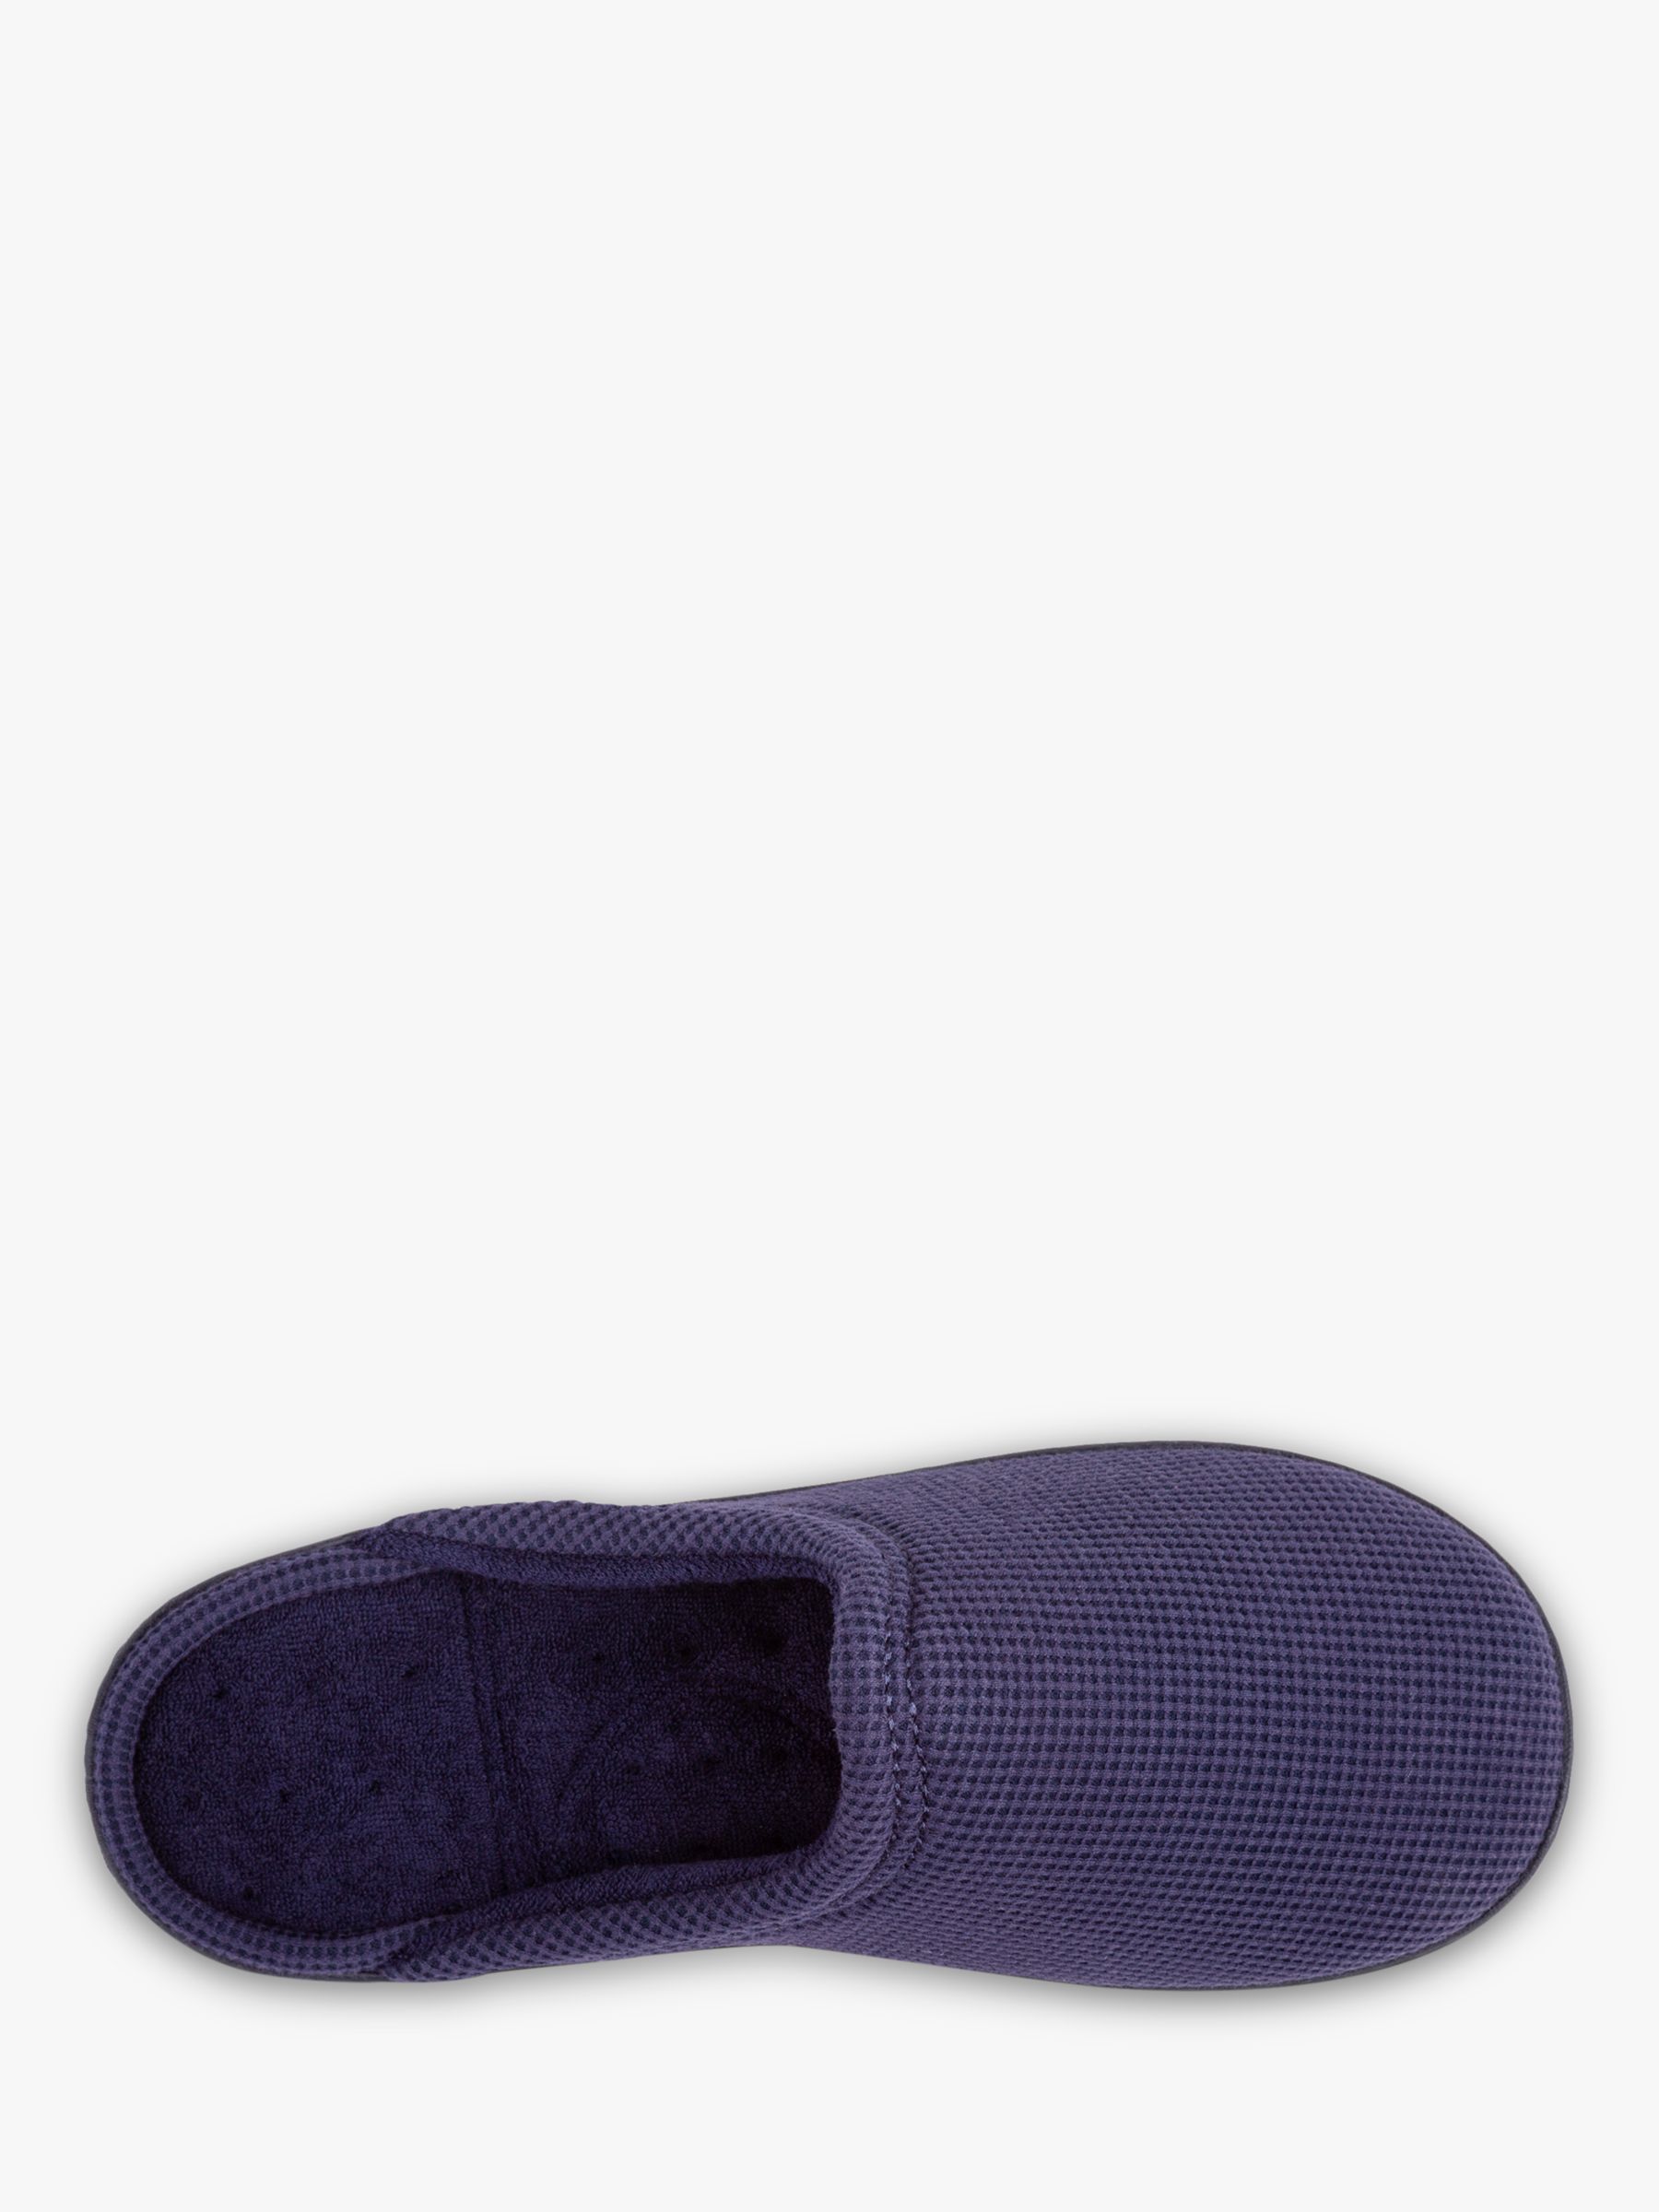 totes Waffle Mule Slippers, Navy, 8